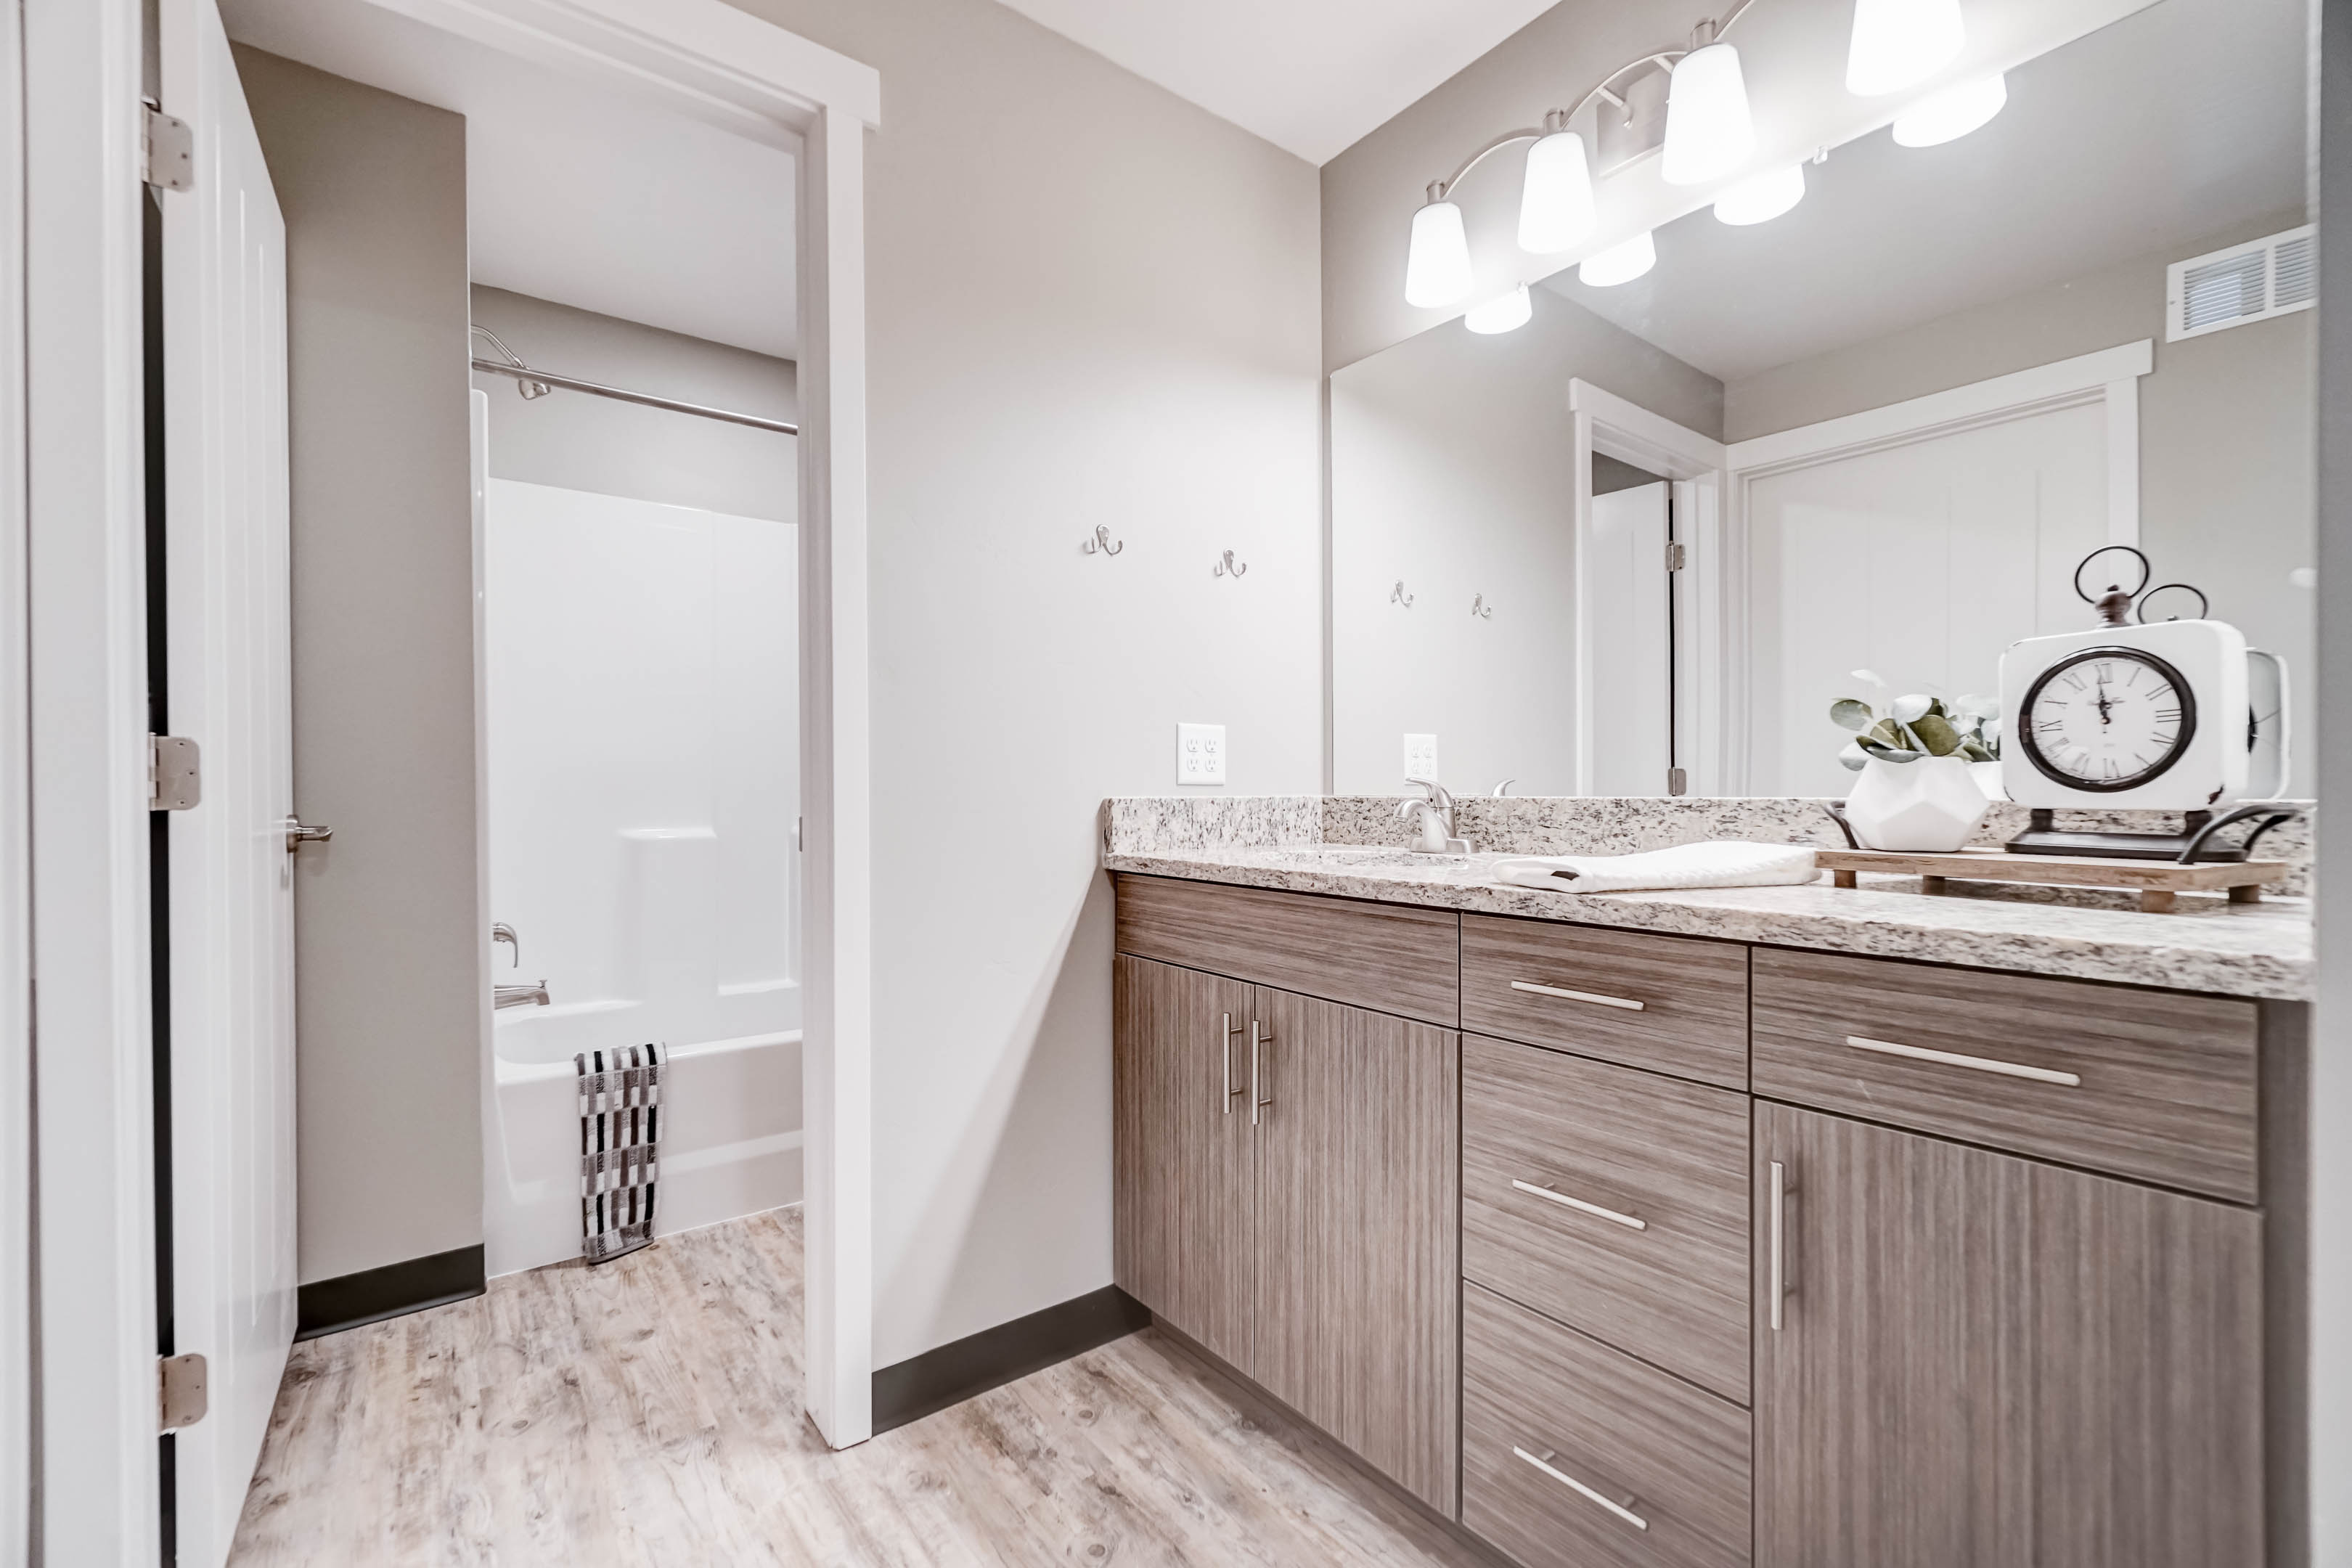 Vanities and bathrooms are separate so someone can be showering while others are getting ready.  Between the two vanities there are more drawers than tenants!